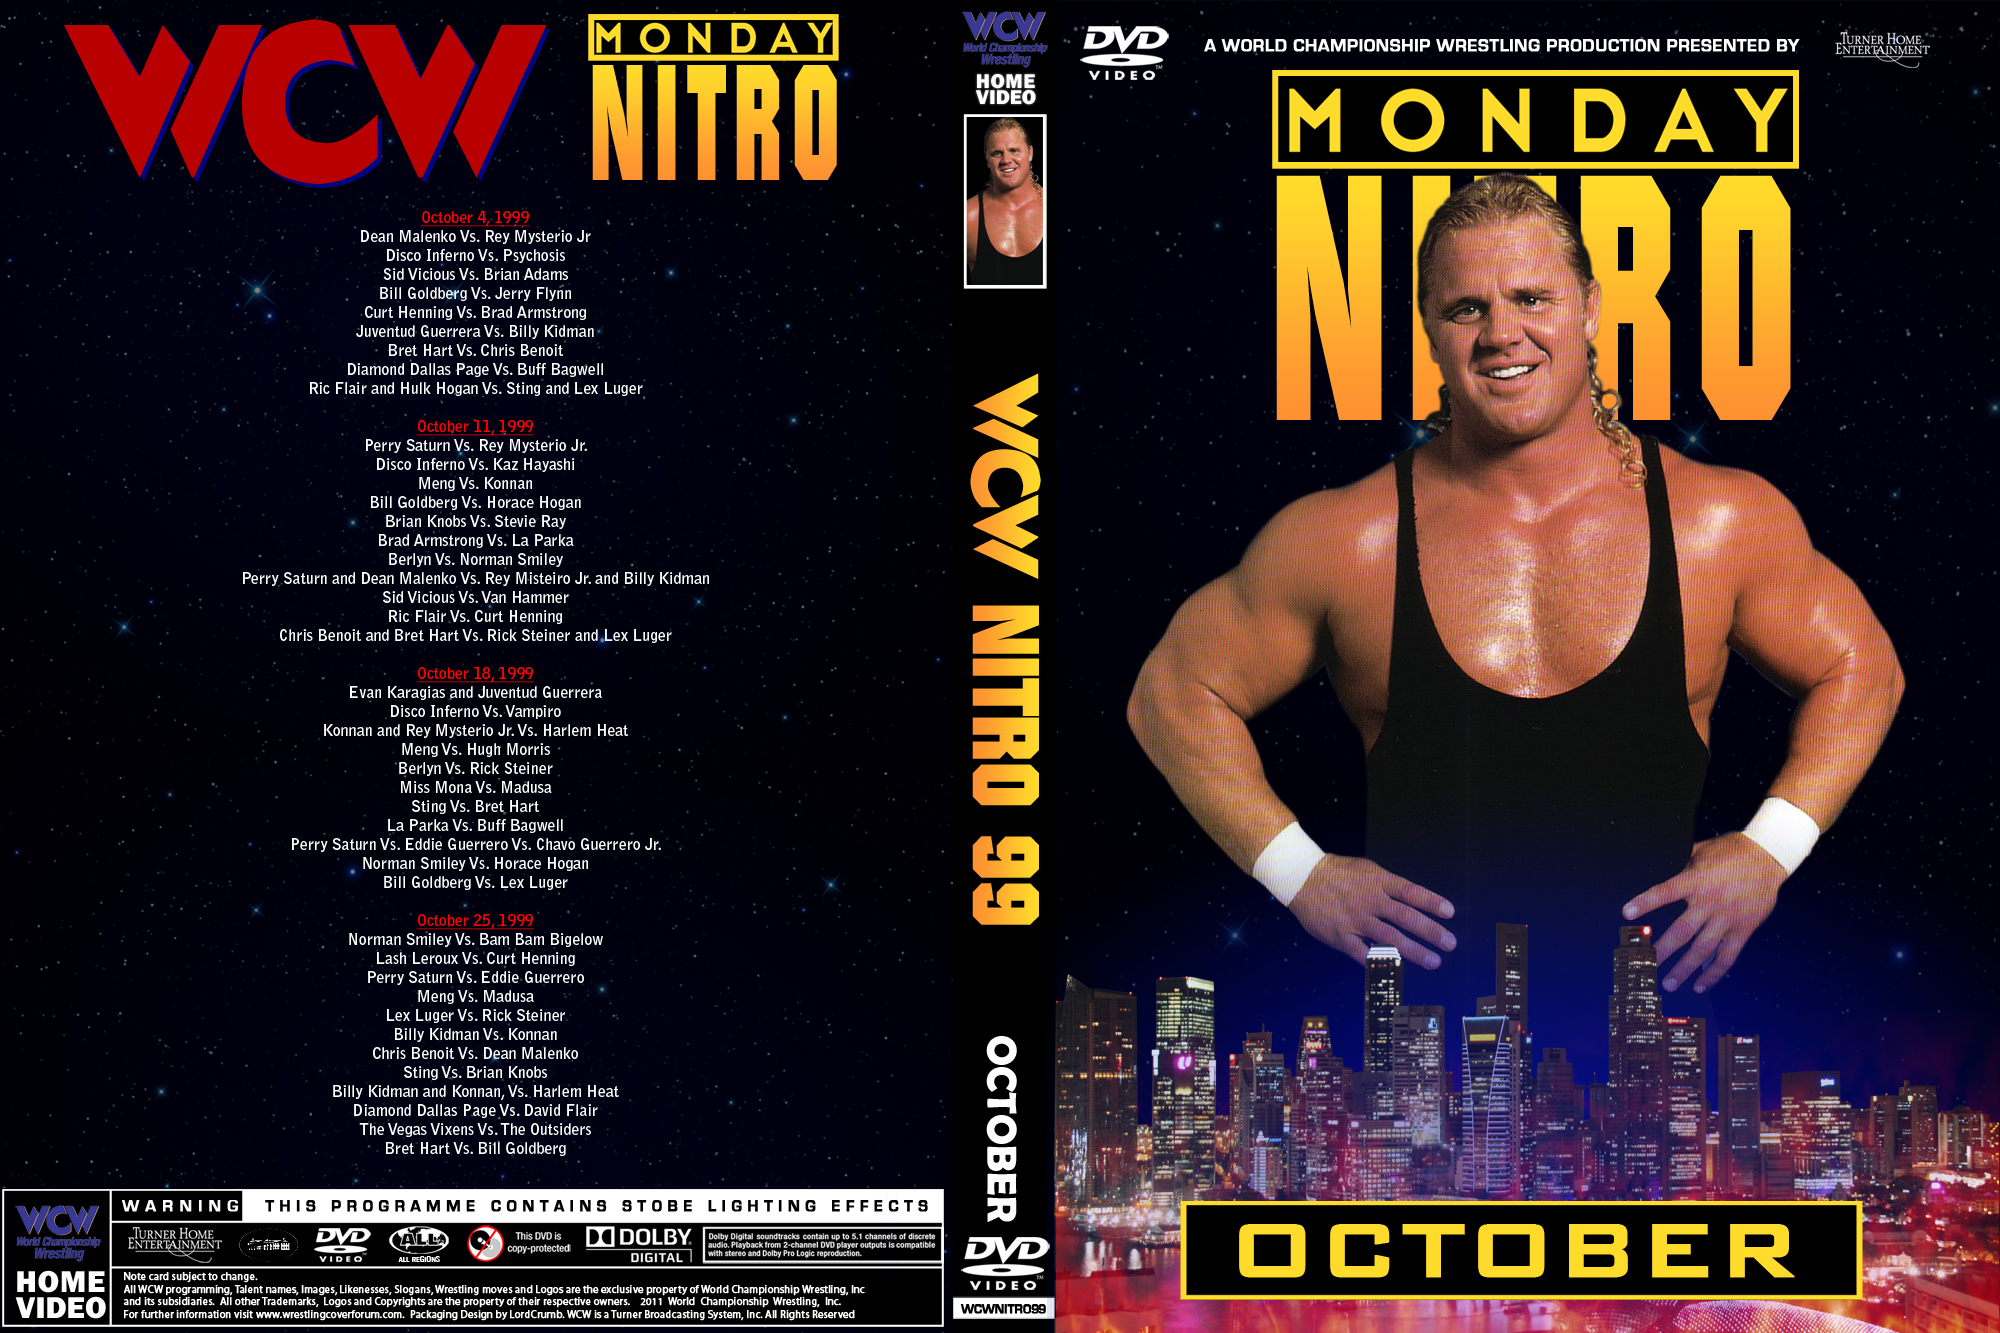 Watch Vault WCW Monday Nitro now on WWE Network! - Video